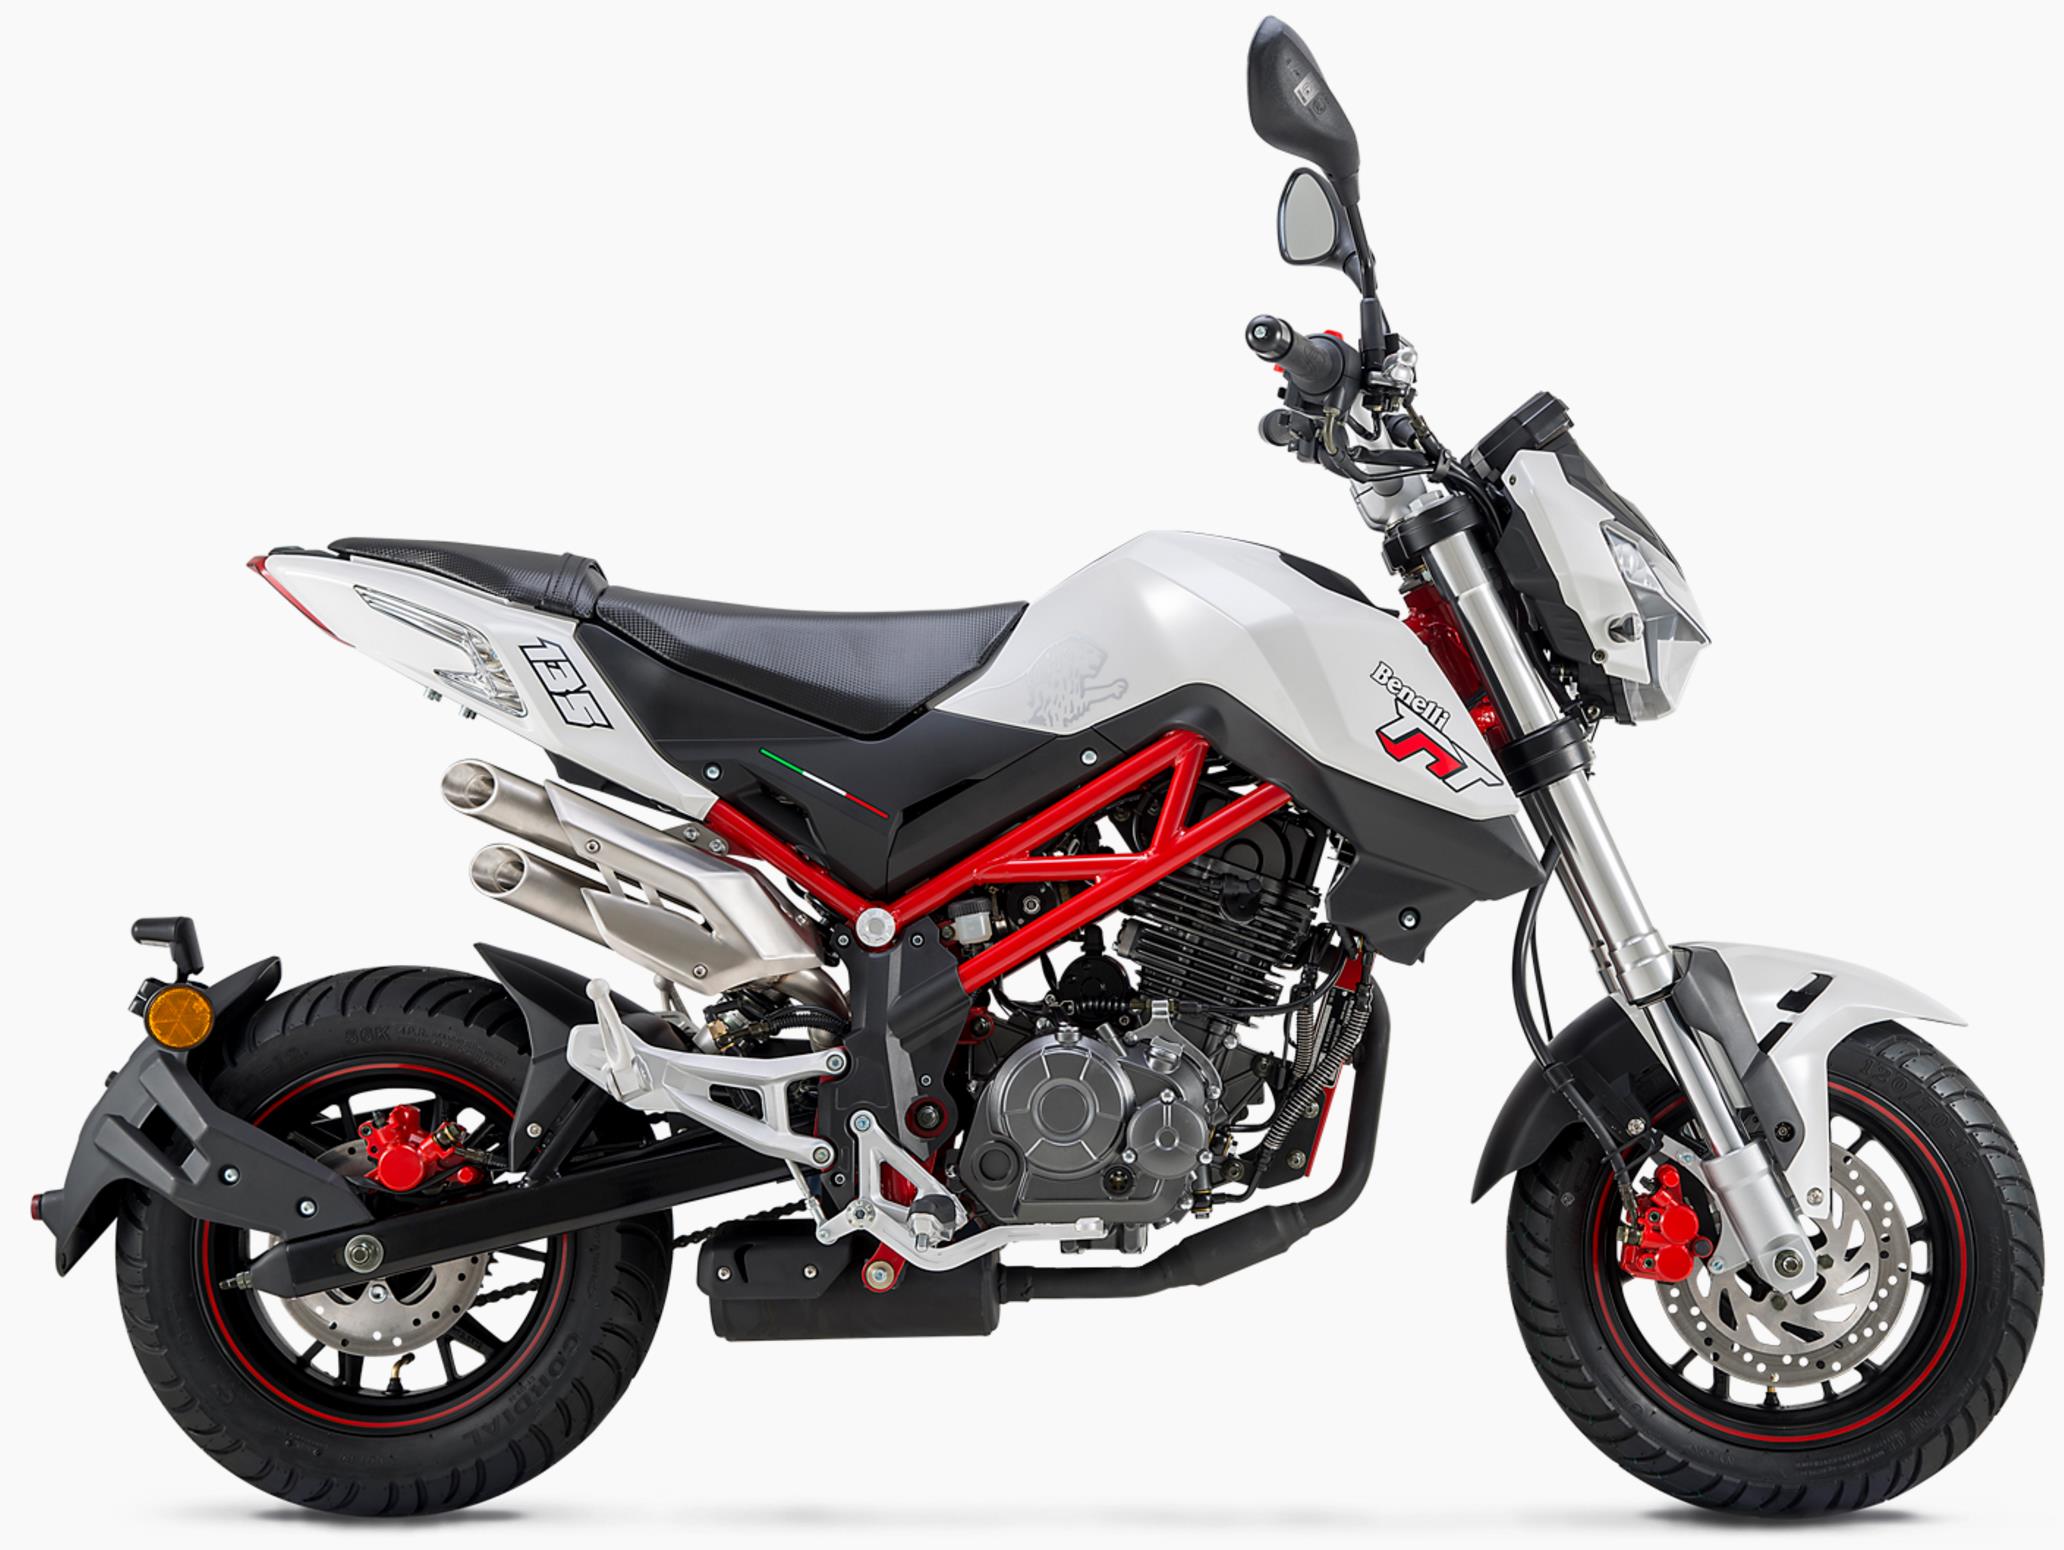 Benelli Tnt 135 Price - How do you Price a Switches?